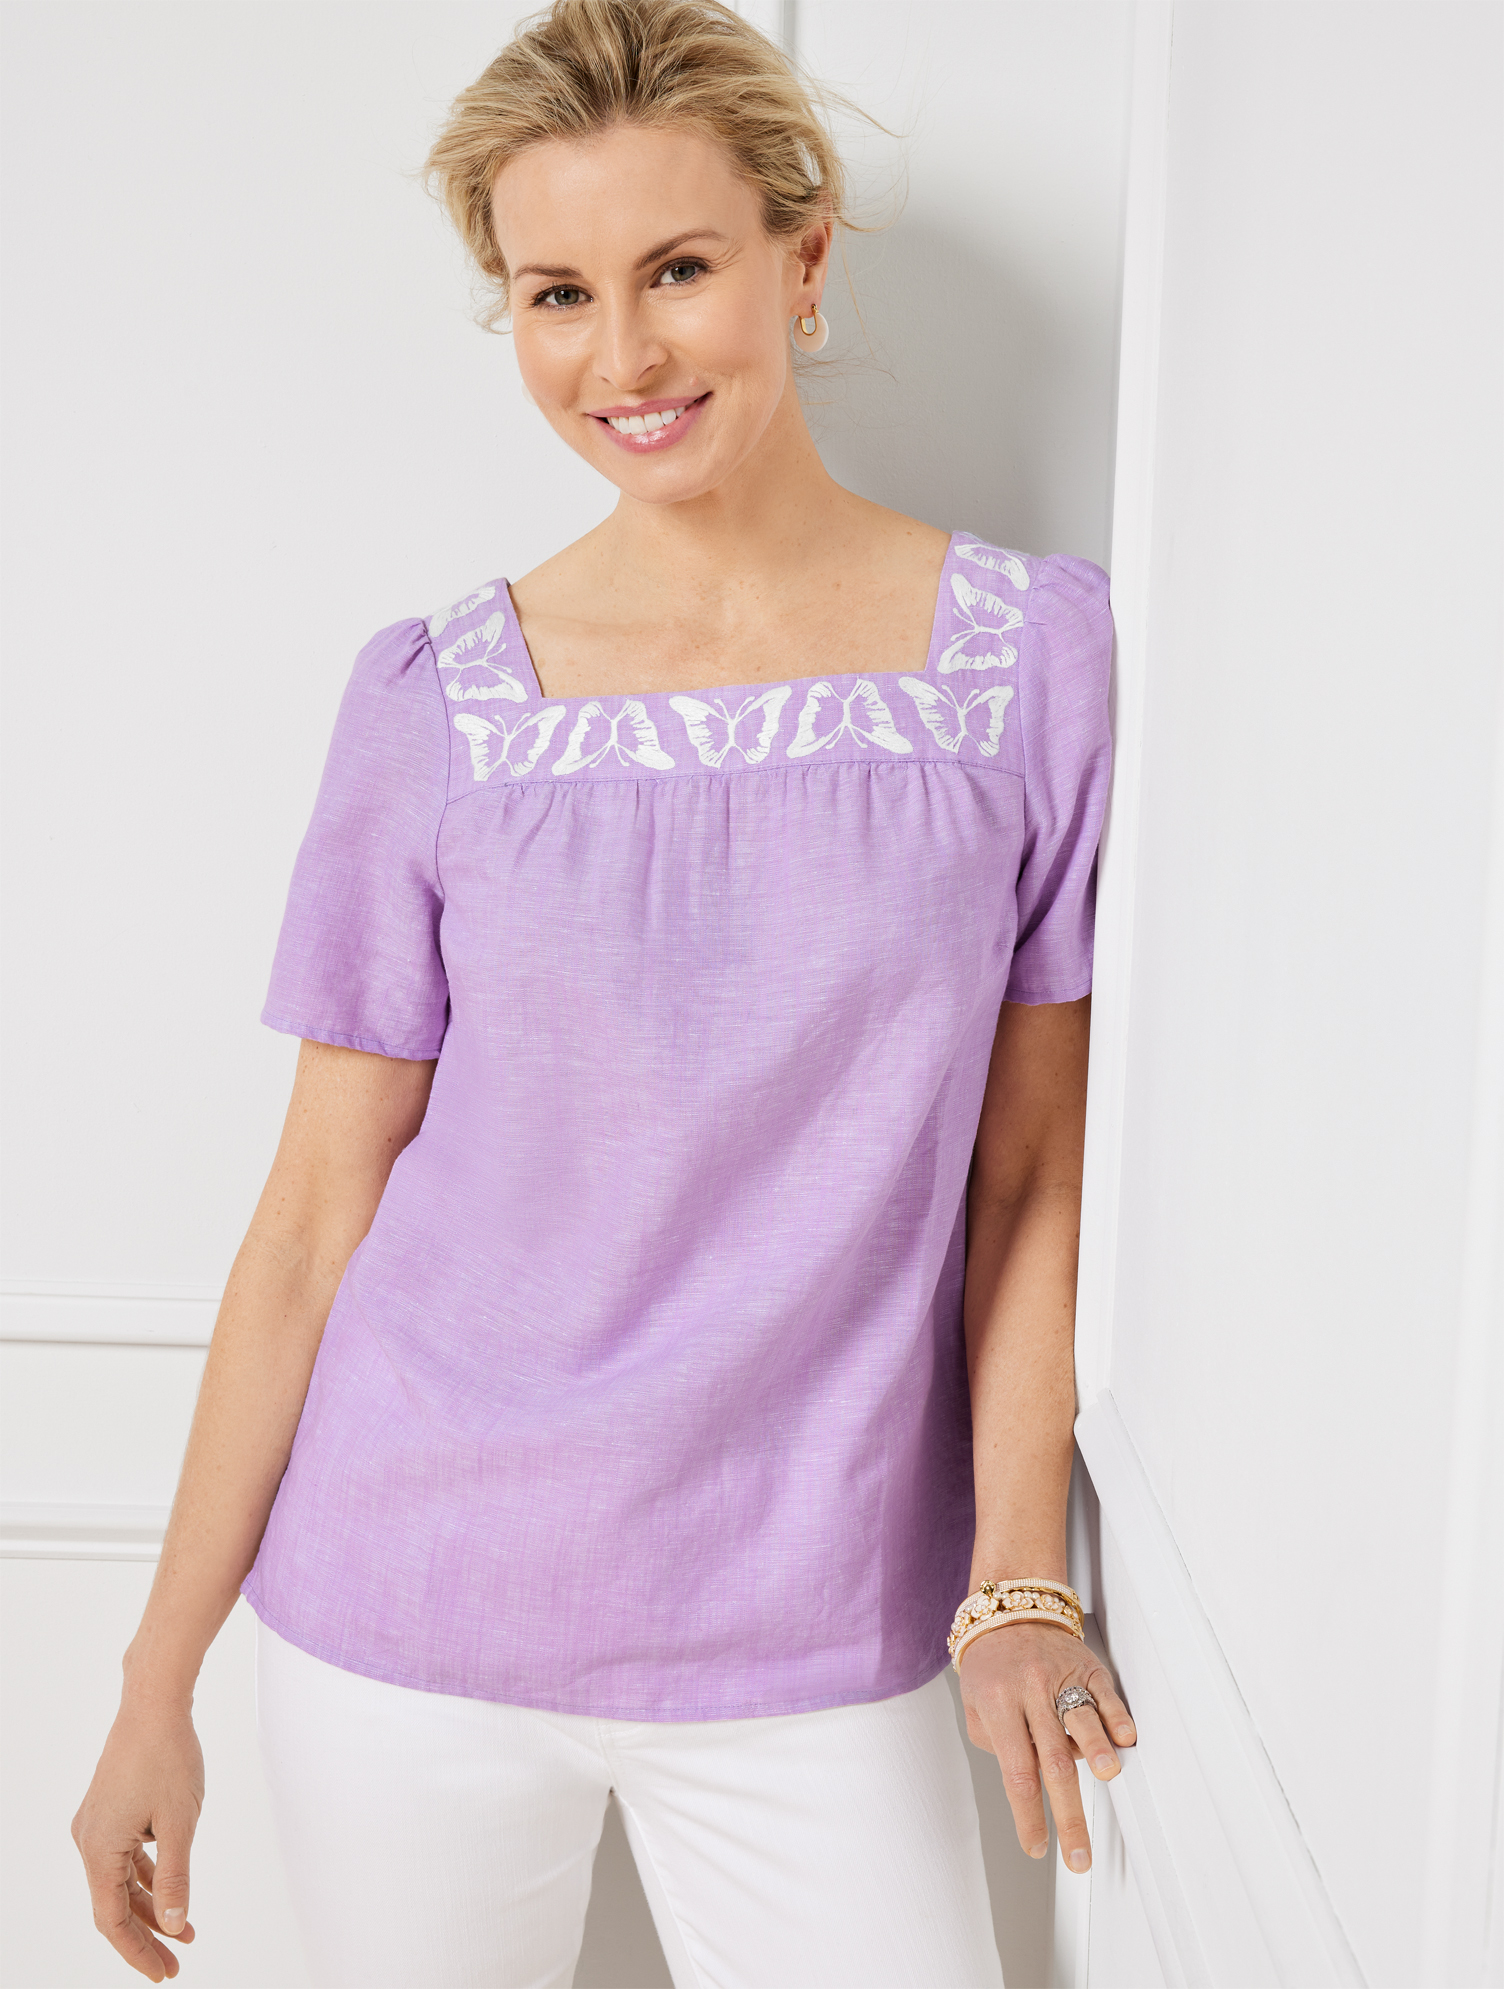 Talbots Petite - Butterfly Embroidered Linen Cotton Square Neck Top - Cross Dye - Purple - Xl